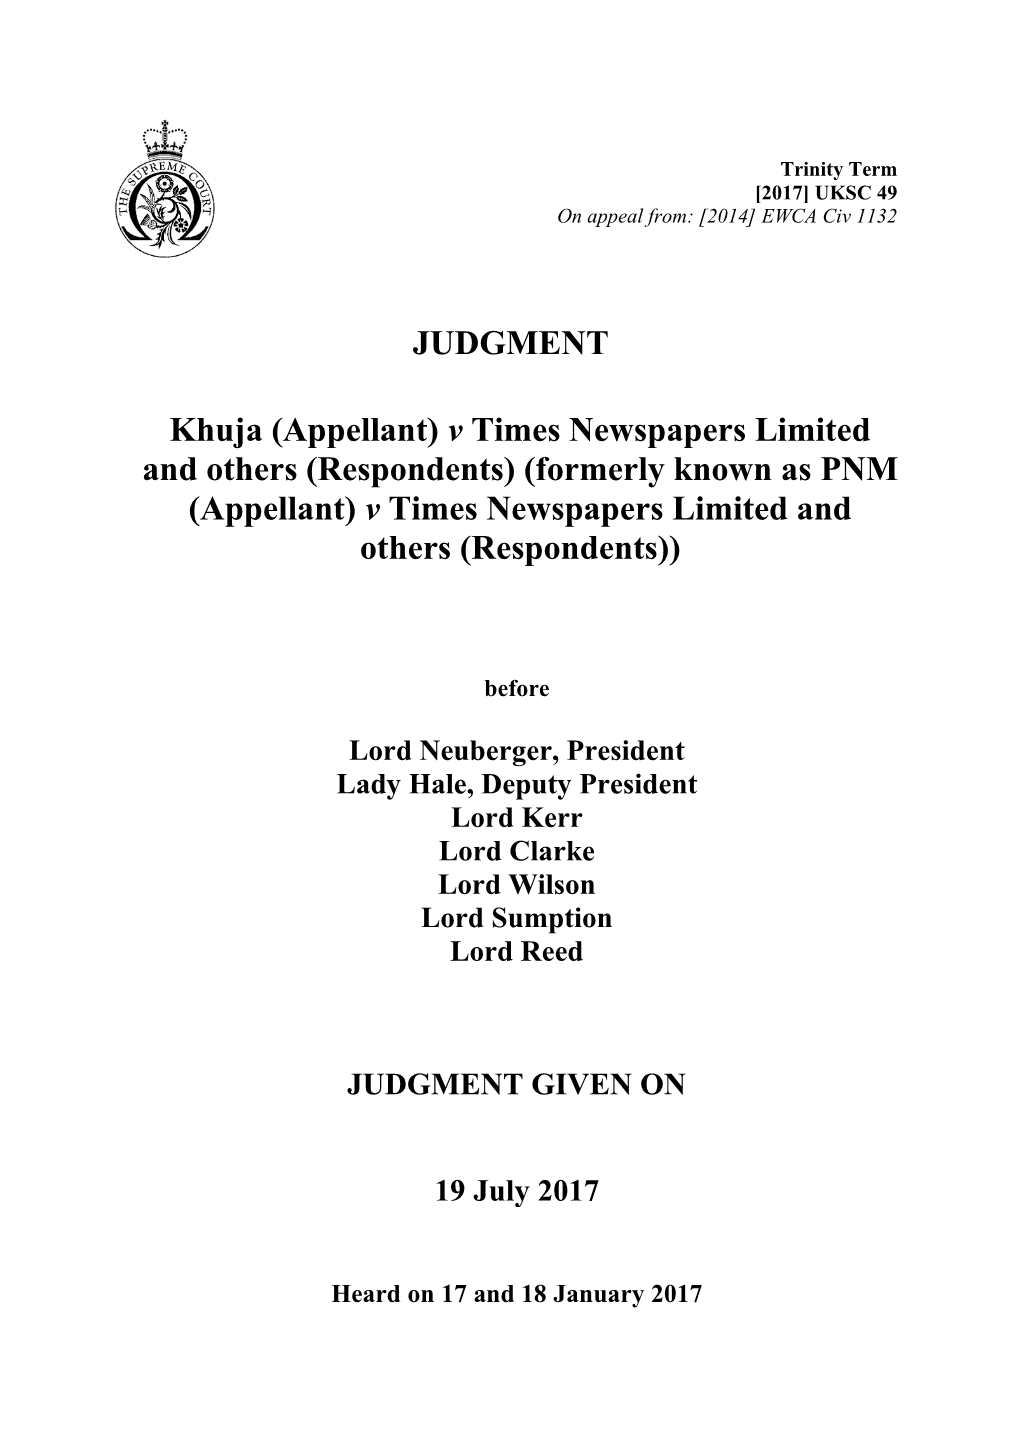 PNM (Appellant) V Times Newspapers Limited and Others (Respondents))